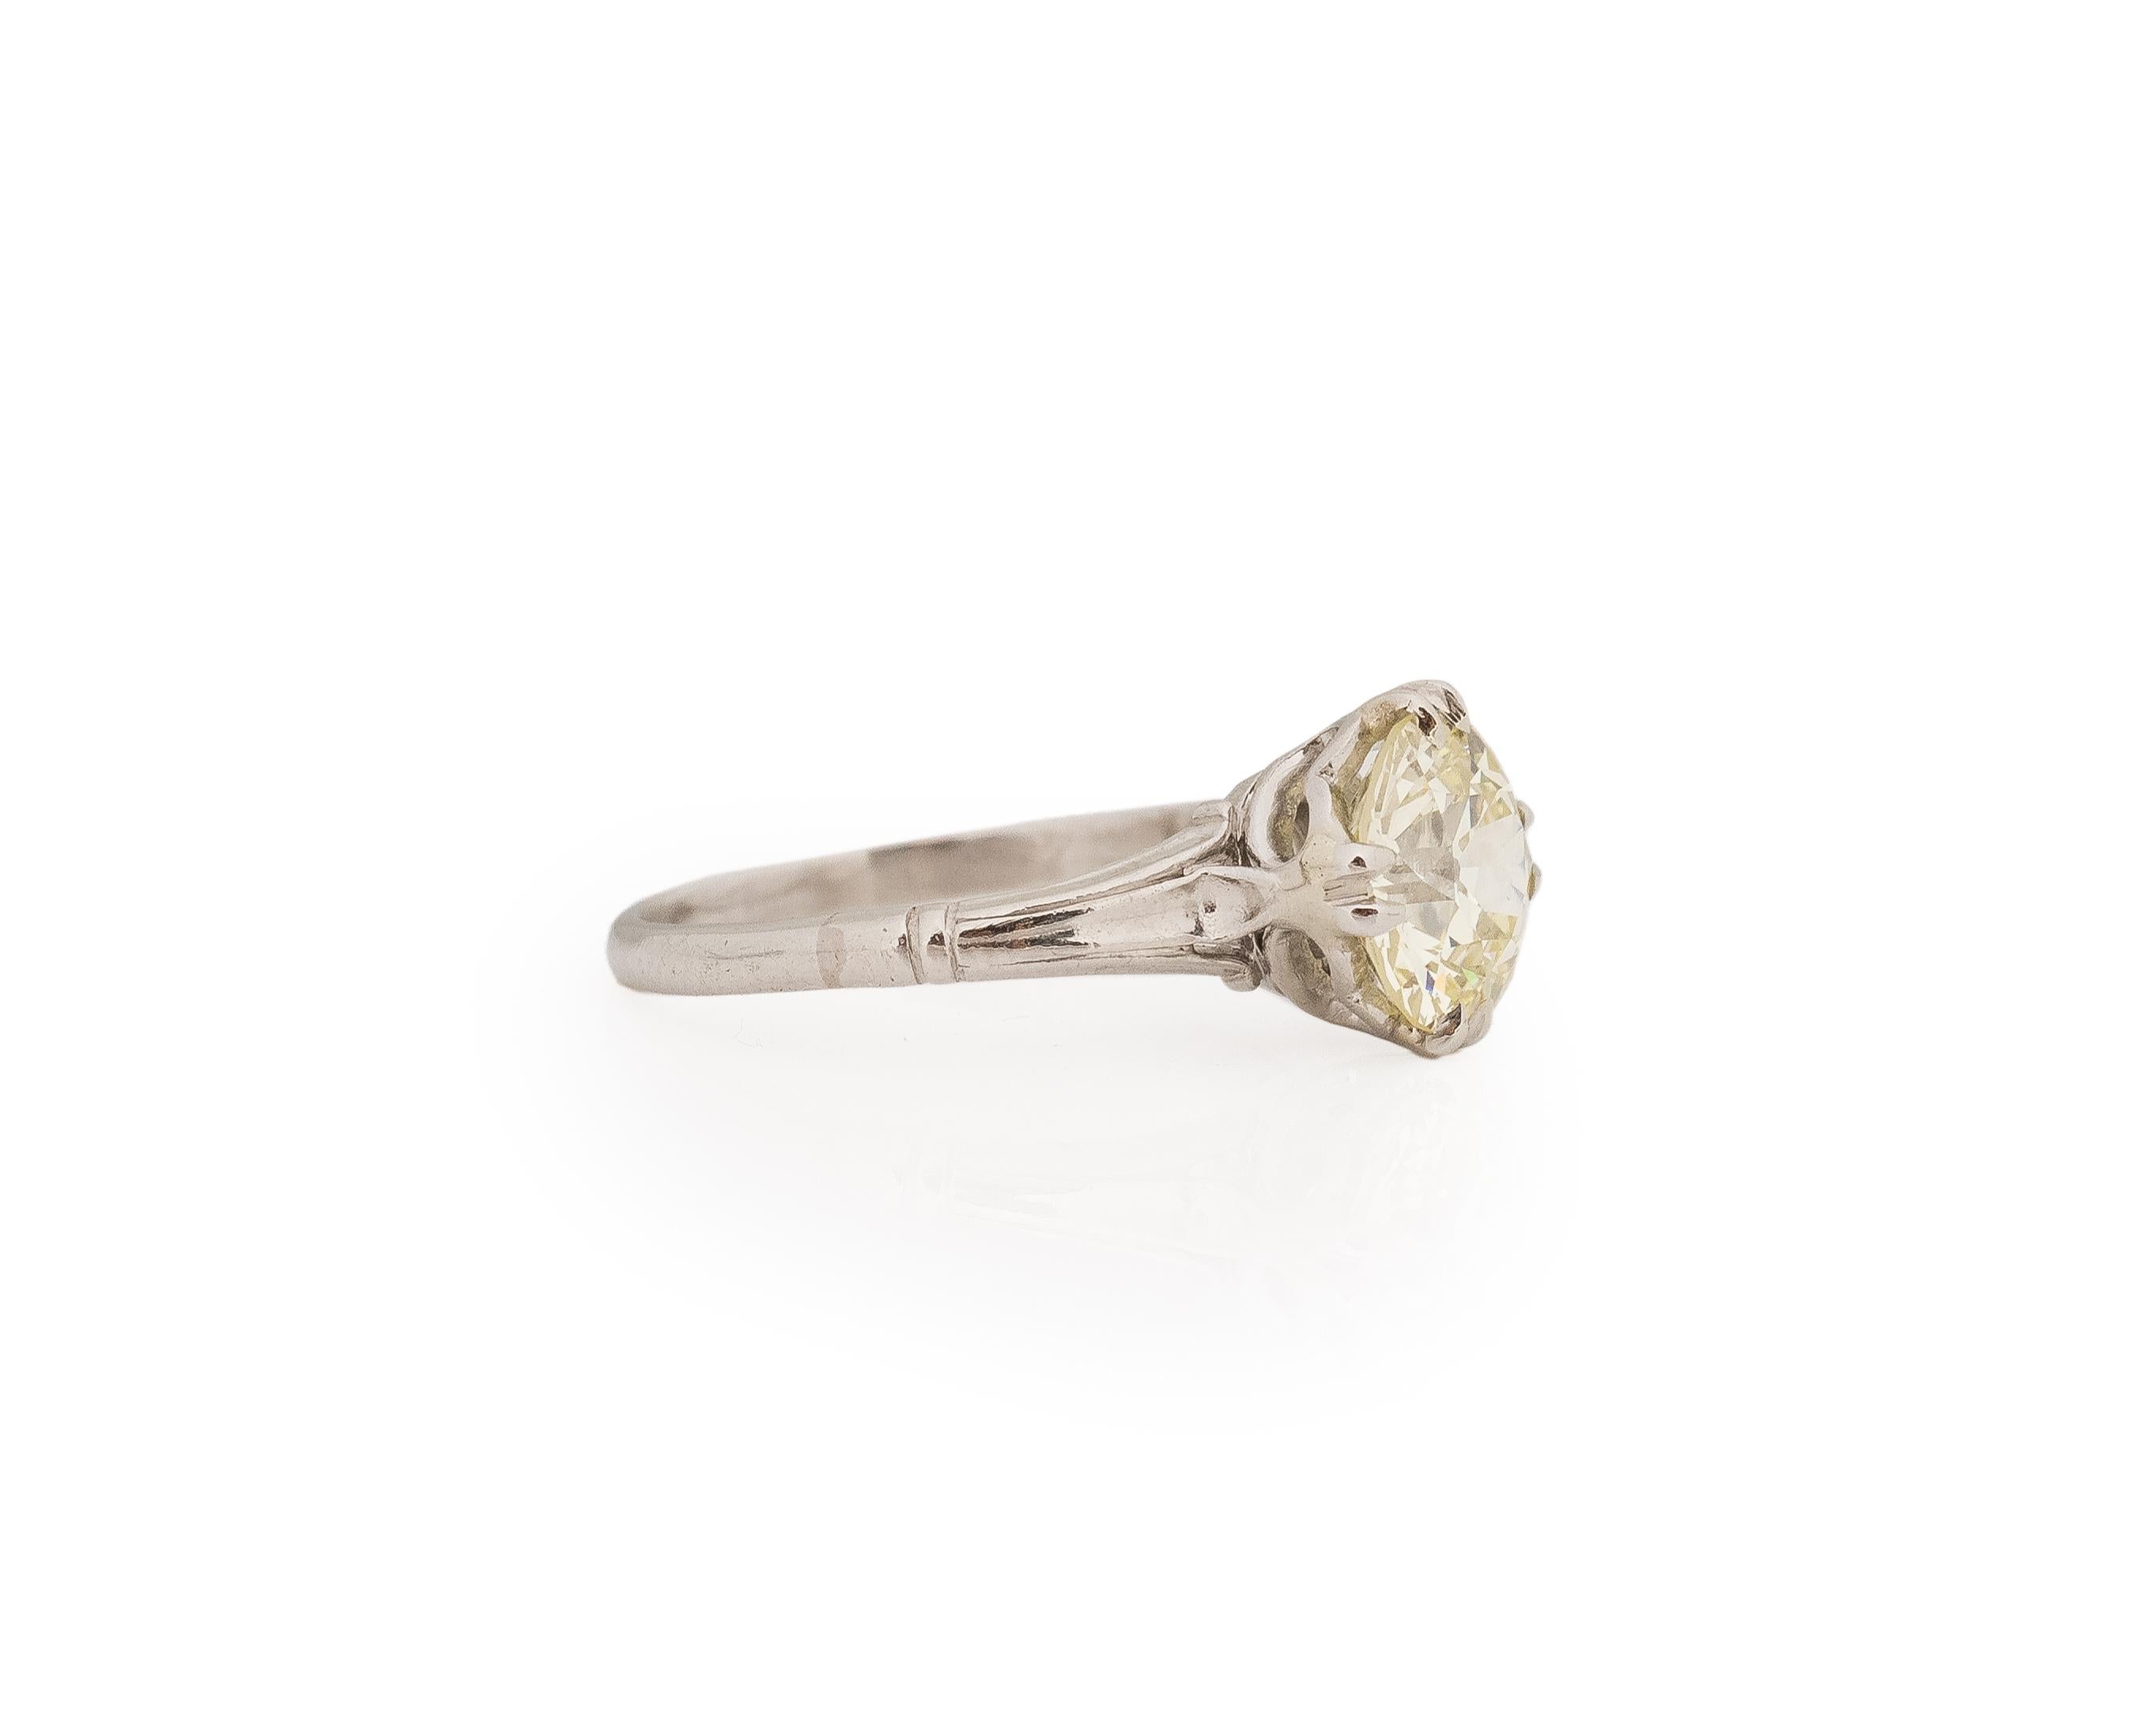 Year: 1920s

Item Details:
Ring Size: 5.5
Metal Type: Platinum [Hallmarked, and Tested]
Weight: 3.7 grams

Diamond Details:

GIA Report#:2235085234
Weight: 1.86ct total weight
Cut: Old European brilliant
Color: Light Yellow (U-V)
Clarity: VS1
Type: